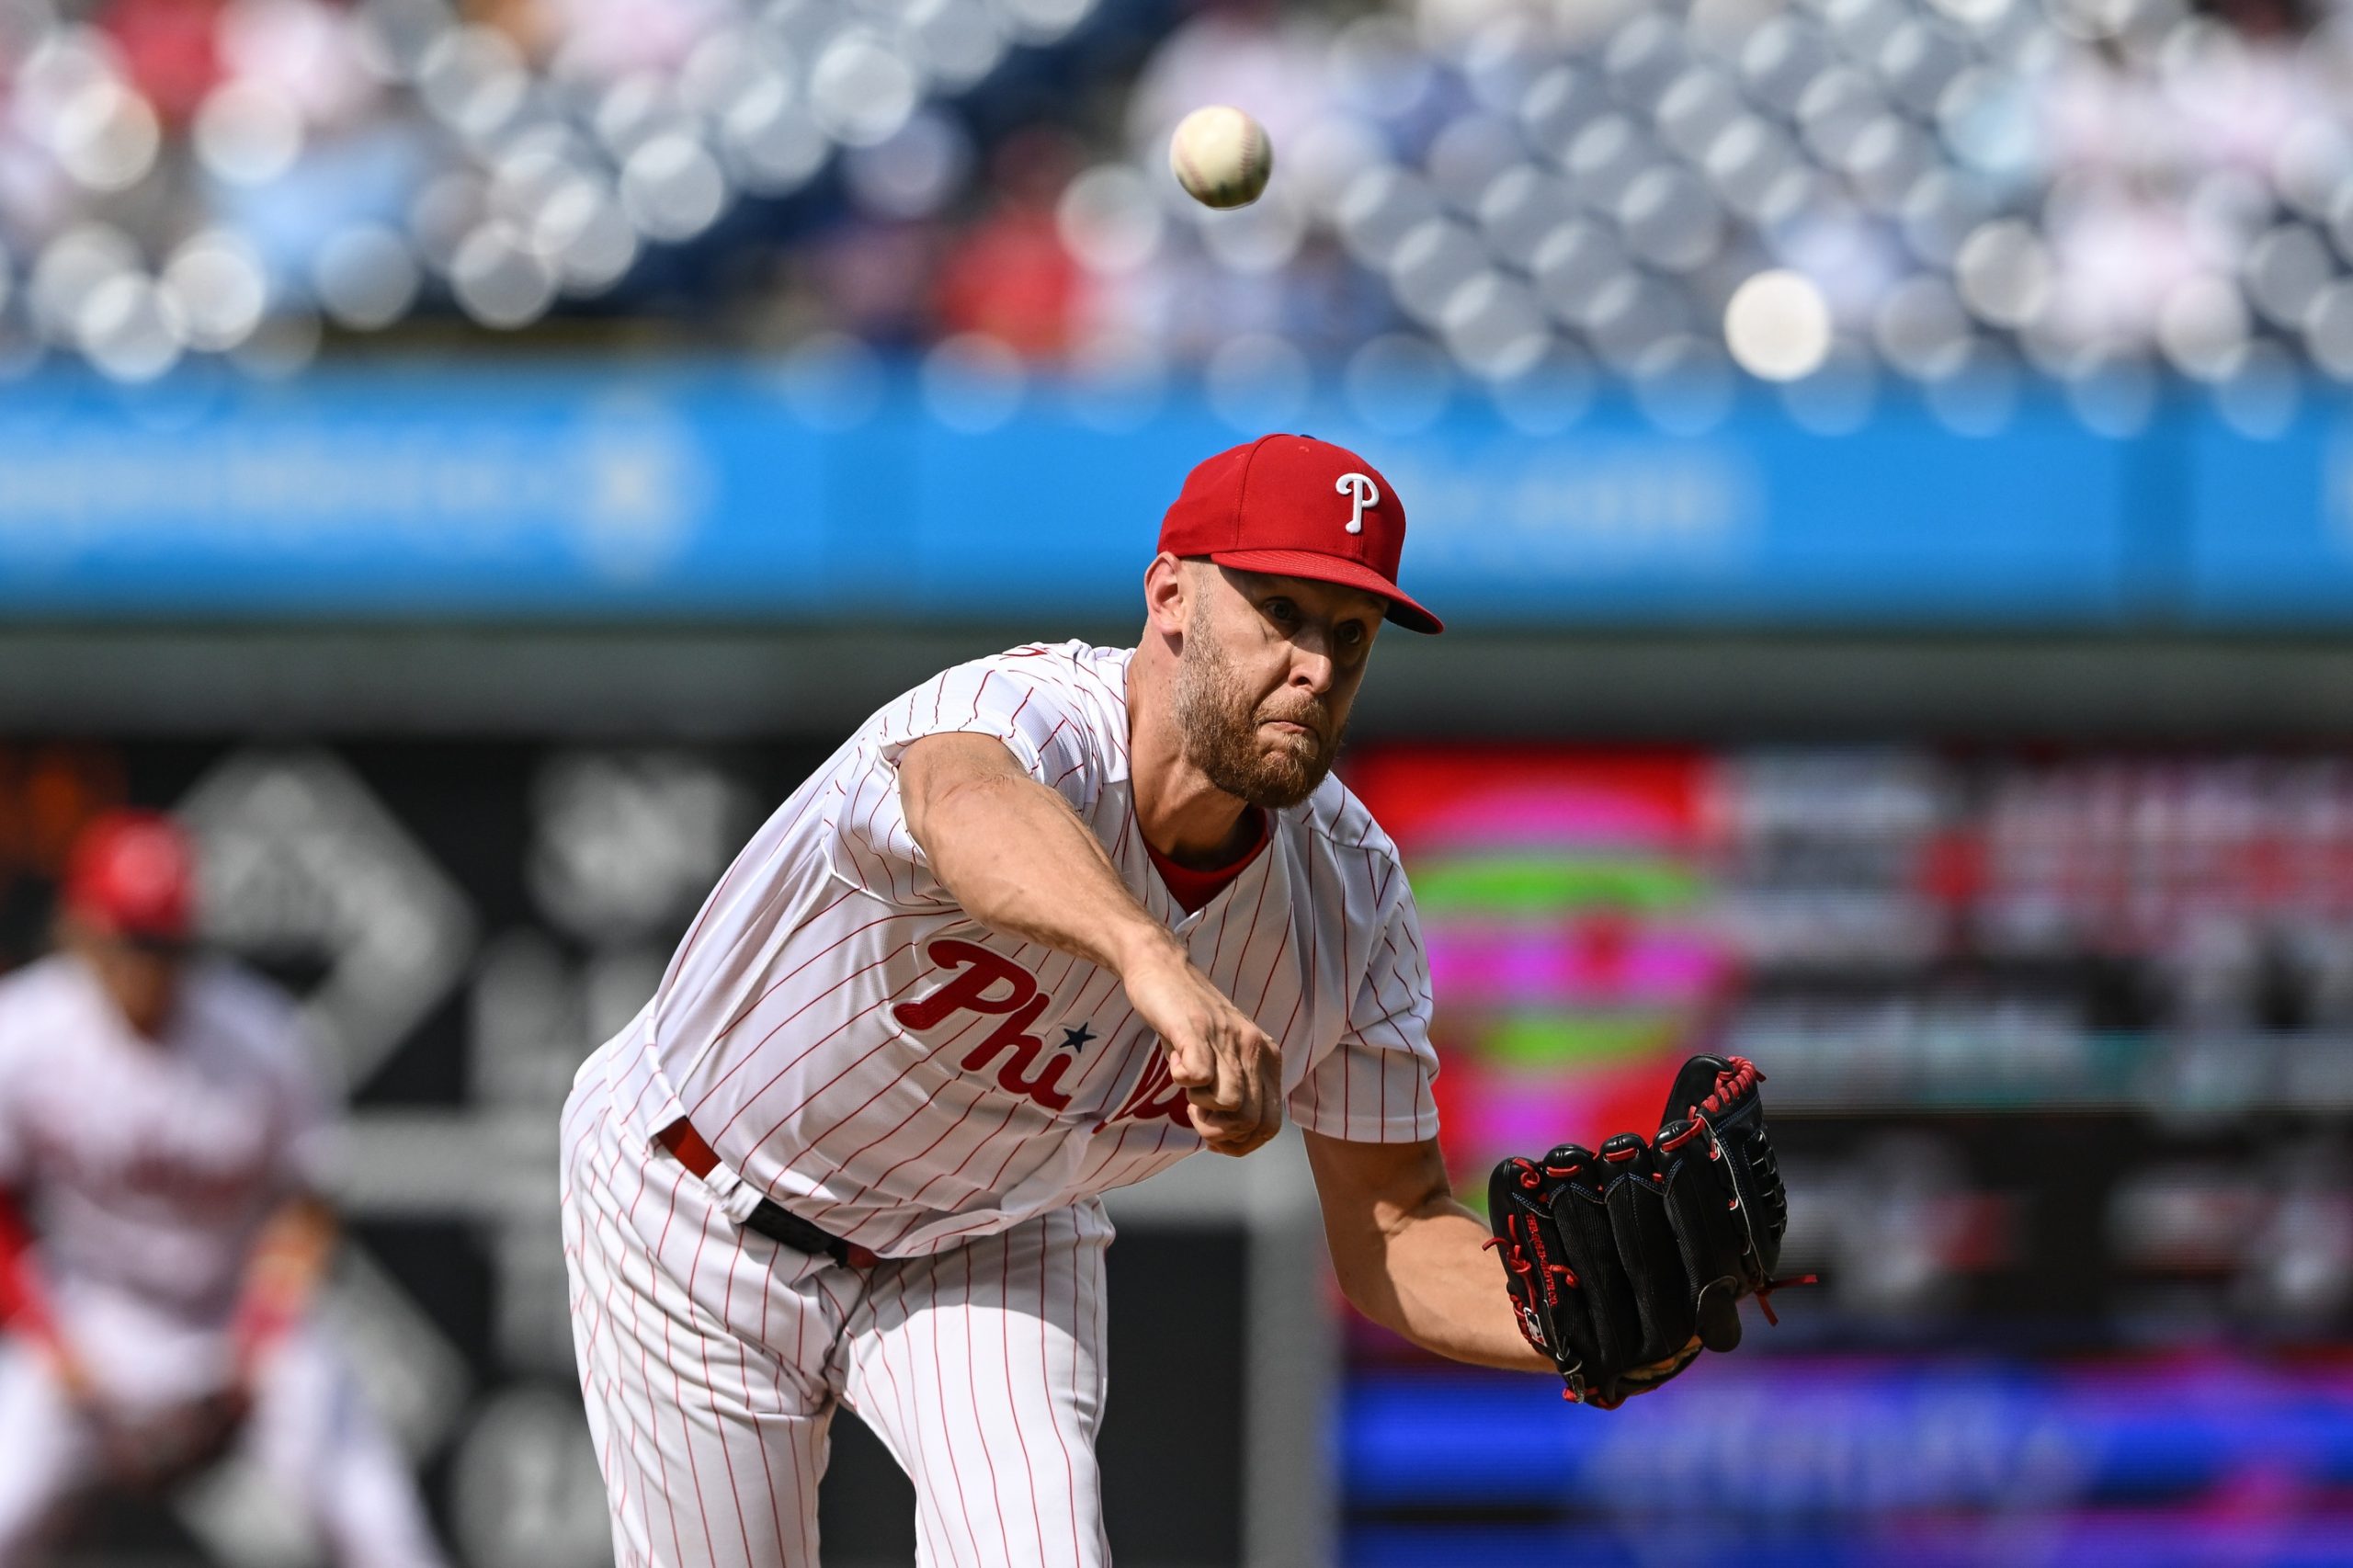 Battle of the East Phillies vs Blue Jays in Exciting Showdown